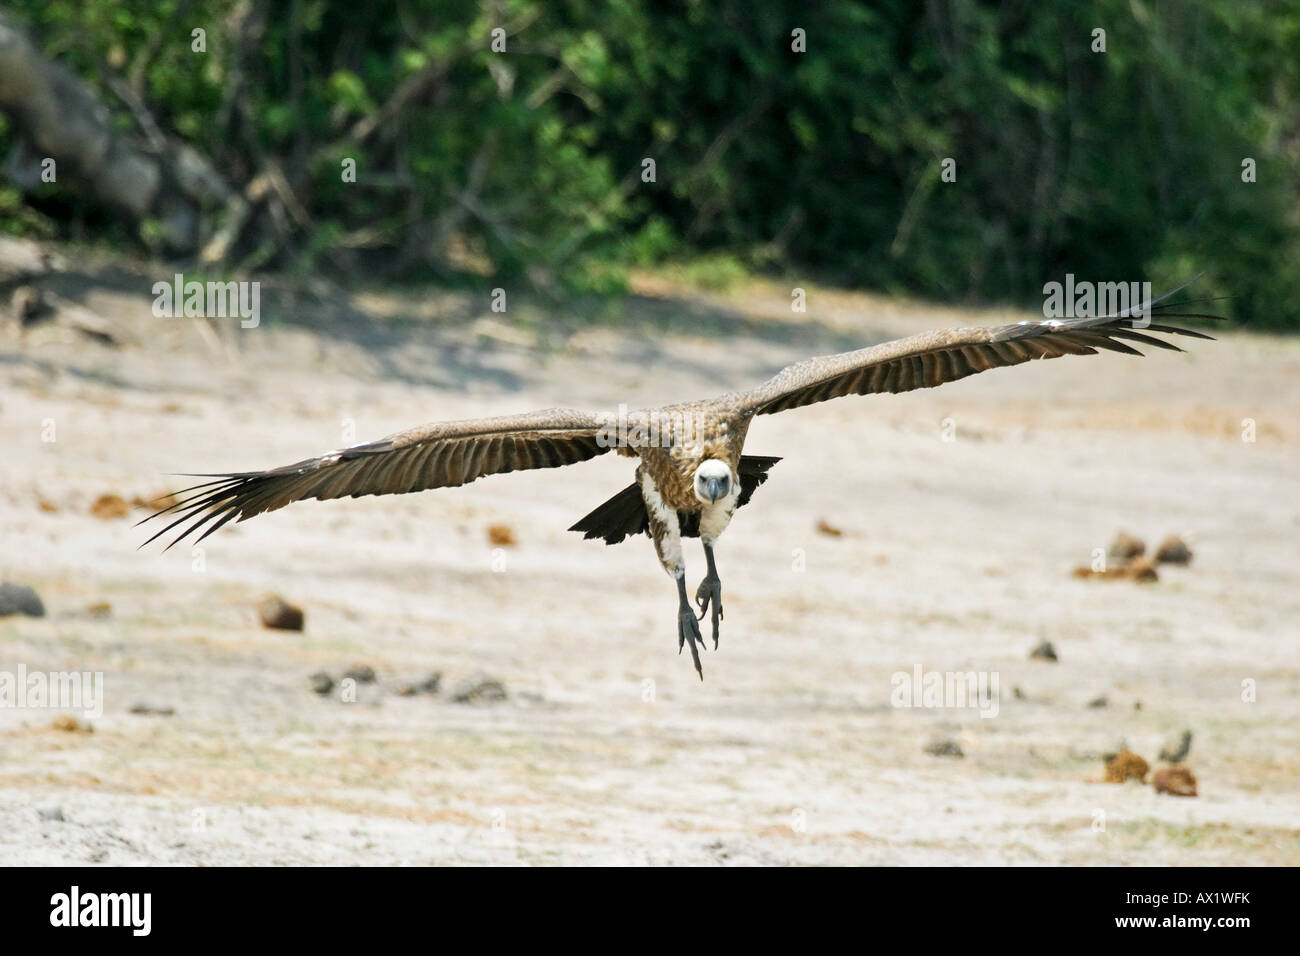 Landing Cape Griffon or Cape Vulture (Gyps coprotheres), Chobe River, Chobe National Park, Botswana, Africa Stock Photo